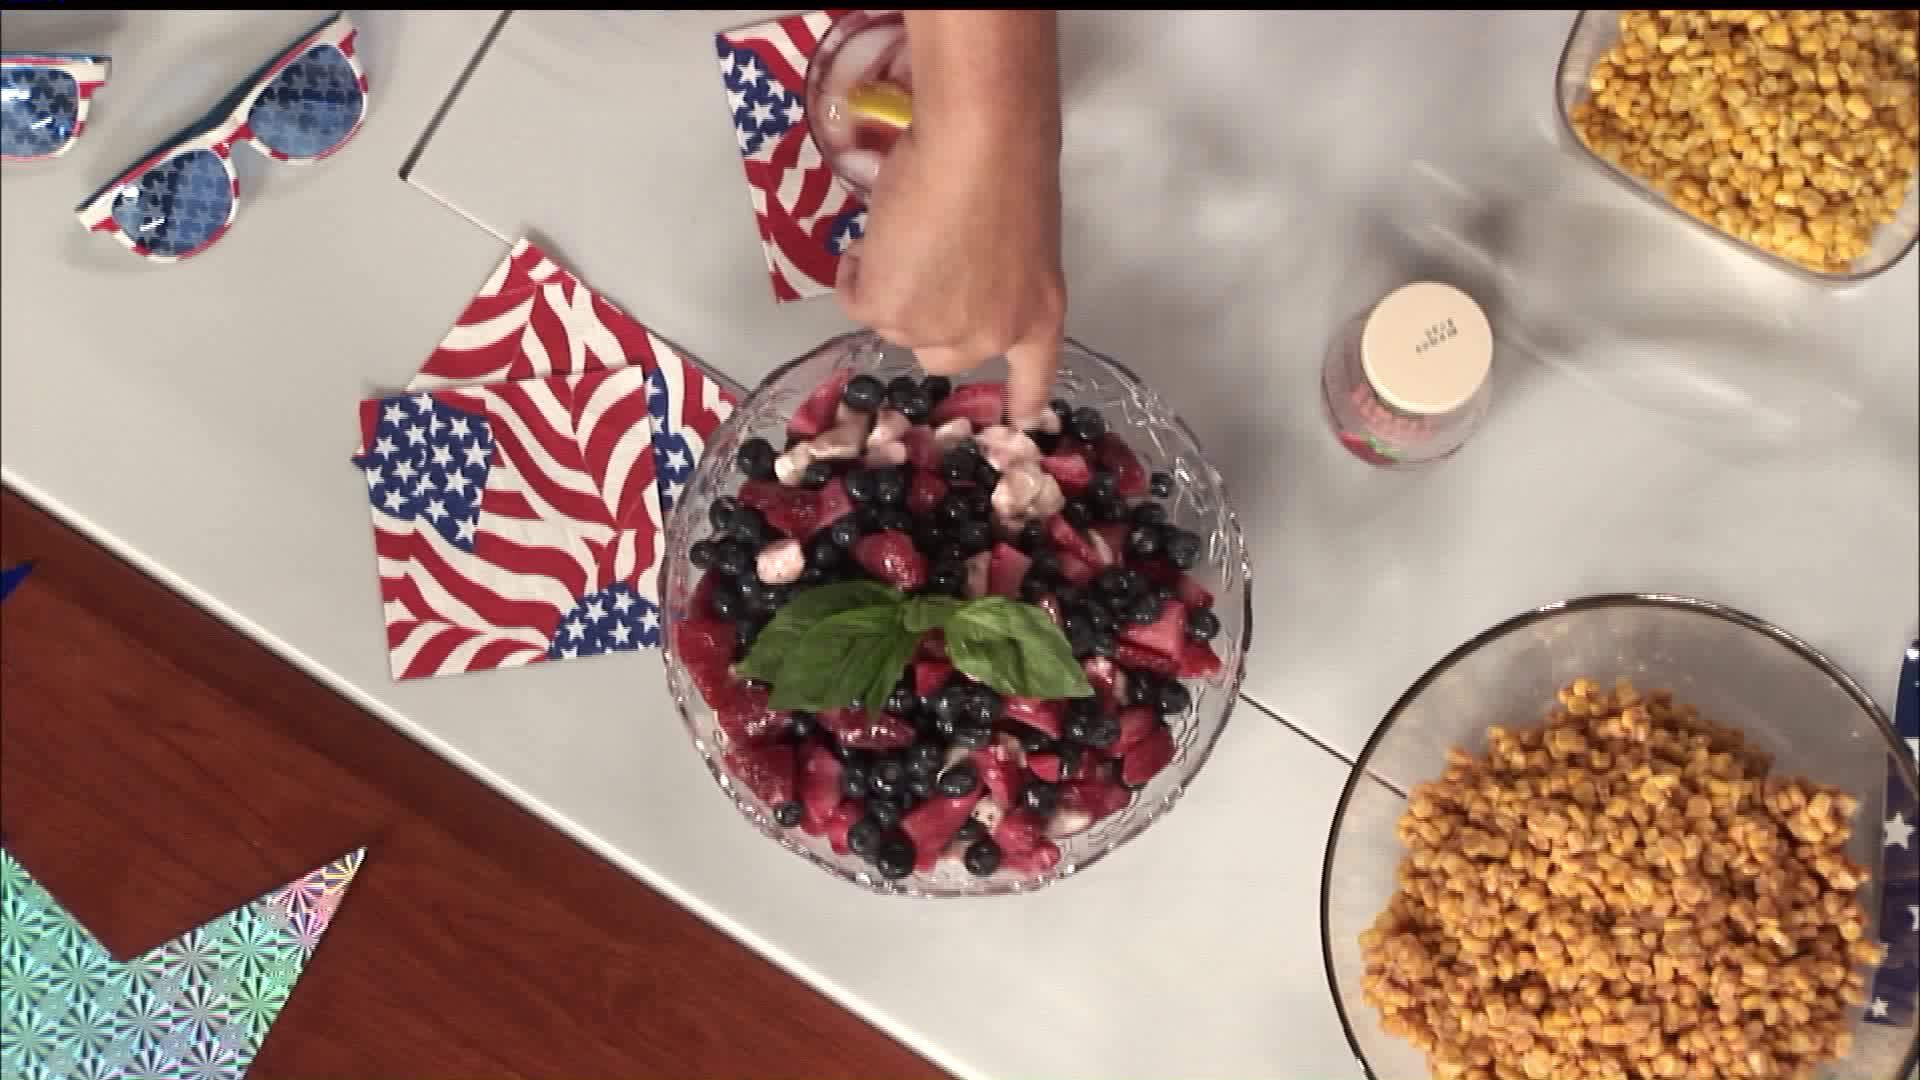 4th of July inspired entertaining ideas from Tim Laird – America’s C.E.O. (Chief Entertaining Officer)